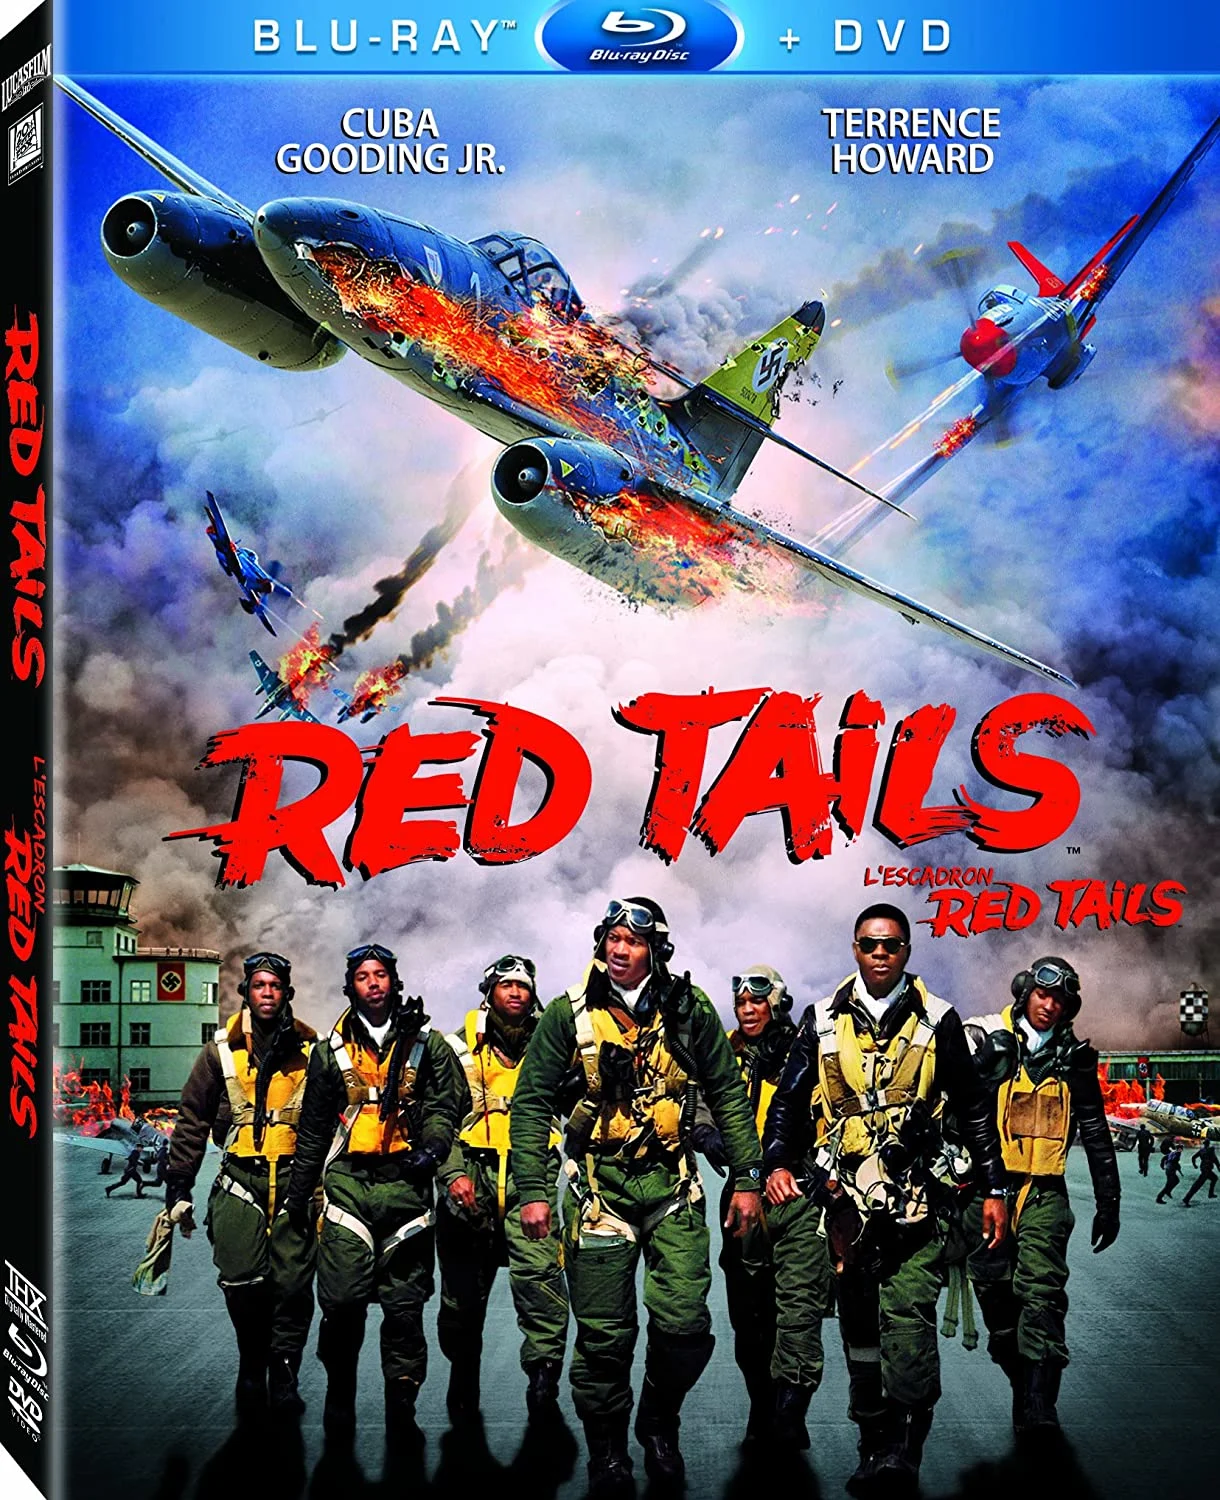 Red Tails (Blu-ray/DVD Combo) on MovieShack